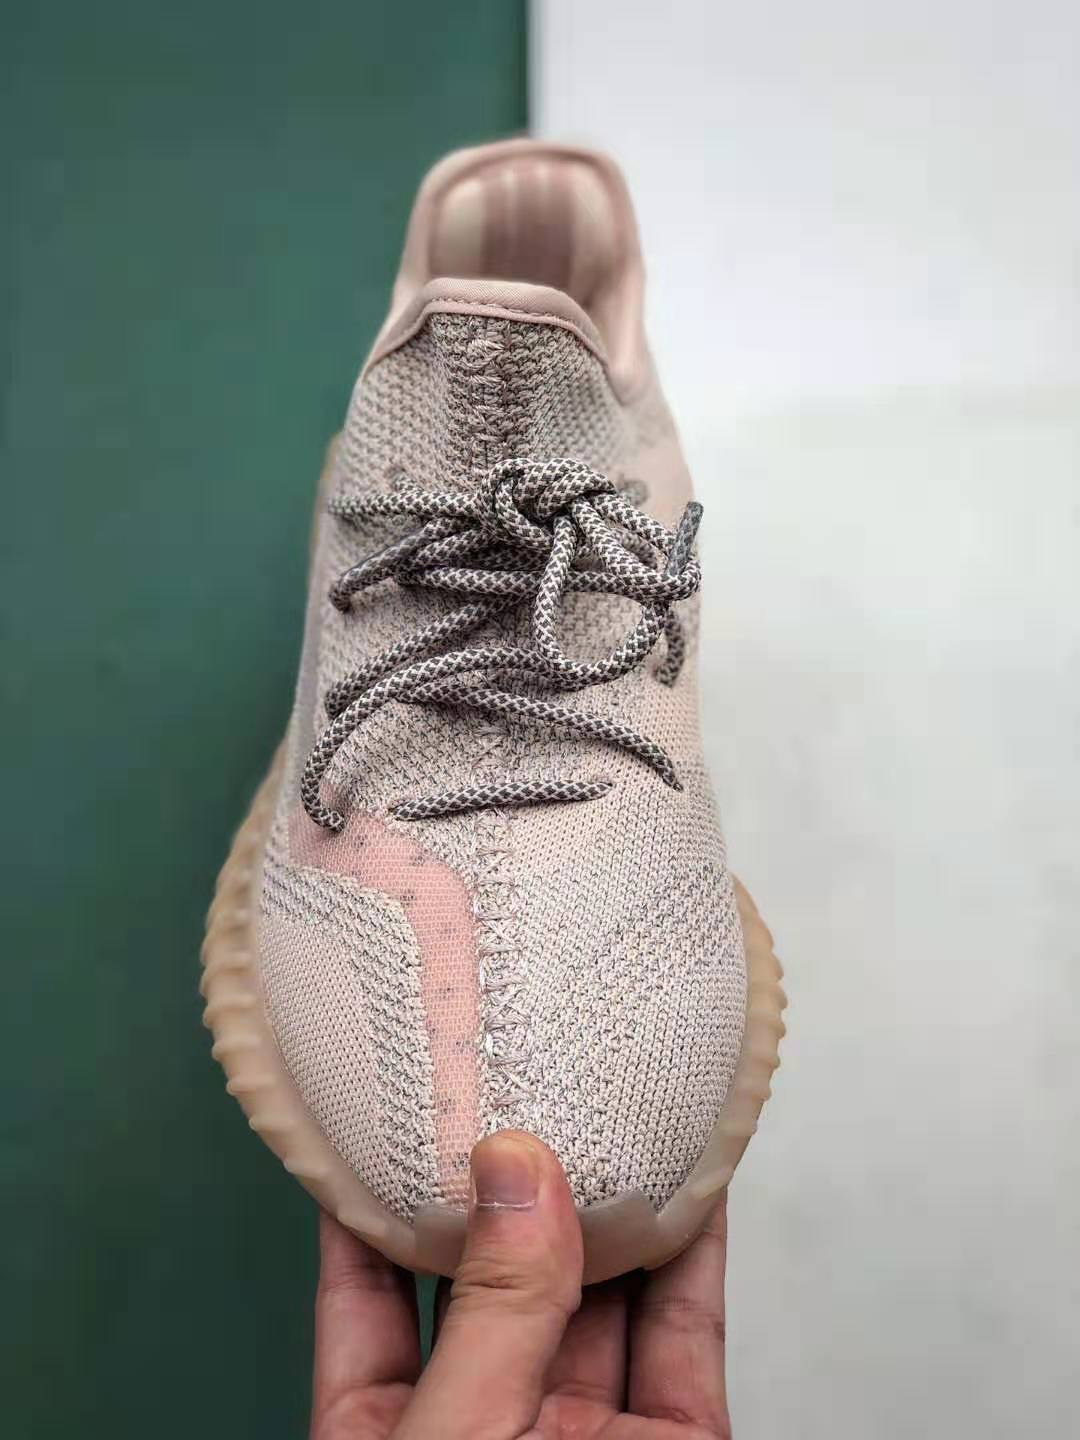 Adidas Yeezy Boost 350 V3 Synth Reflective FV5668 - Top Quality and Style